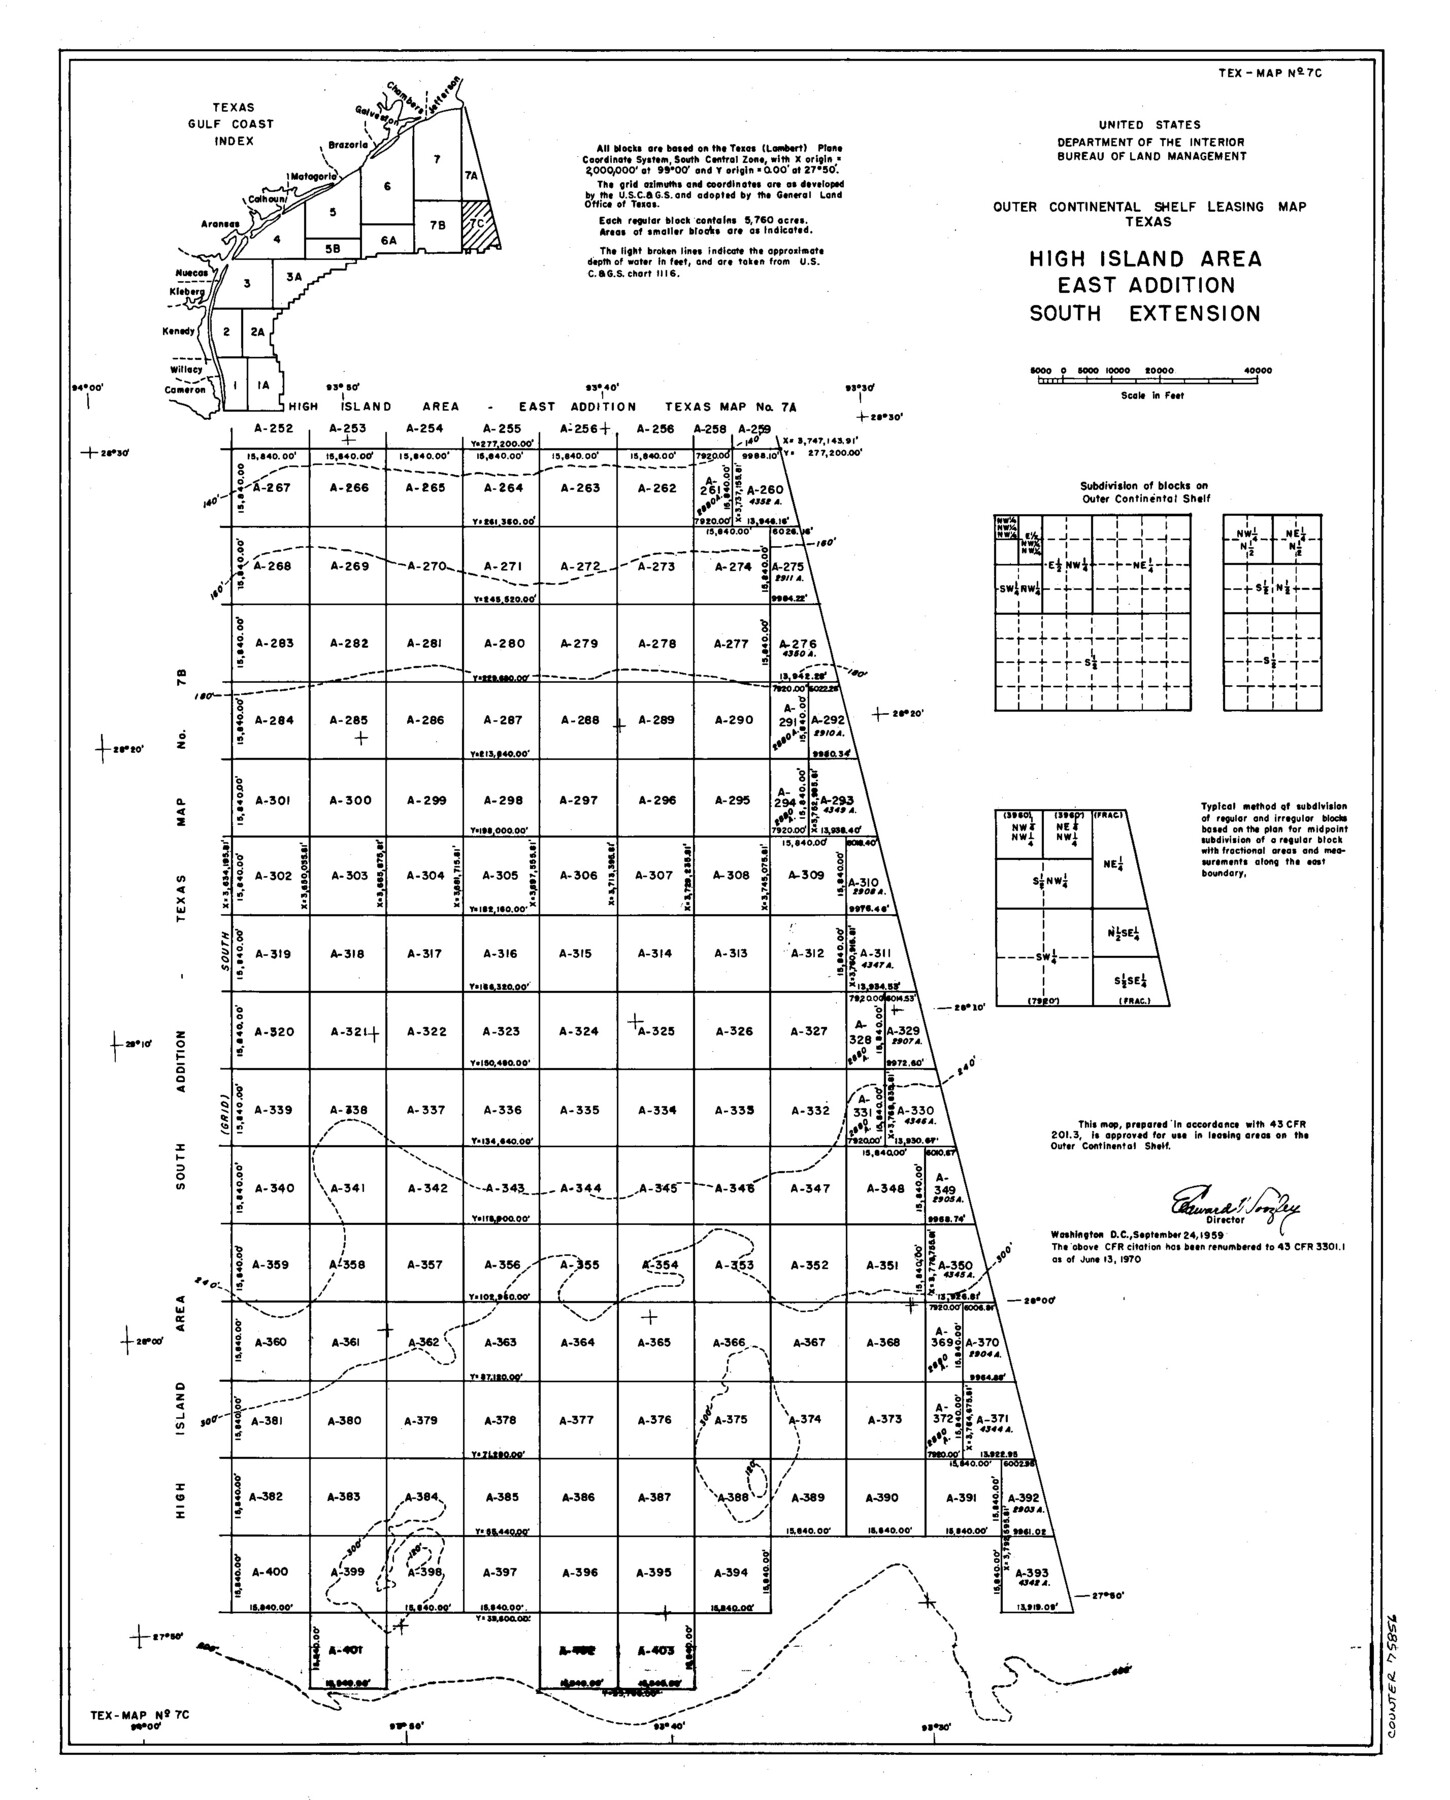 75856, Outer Continental Shelf Leasing Maps (Texas Offshore Operations), General Map Collection